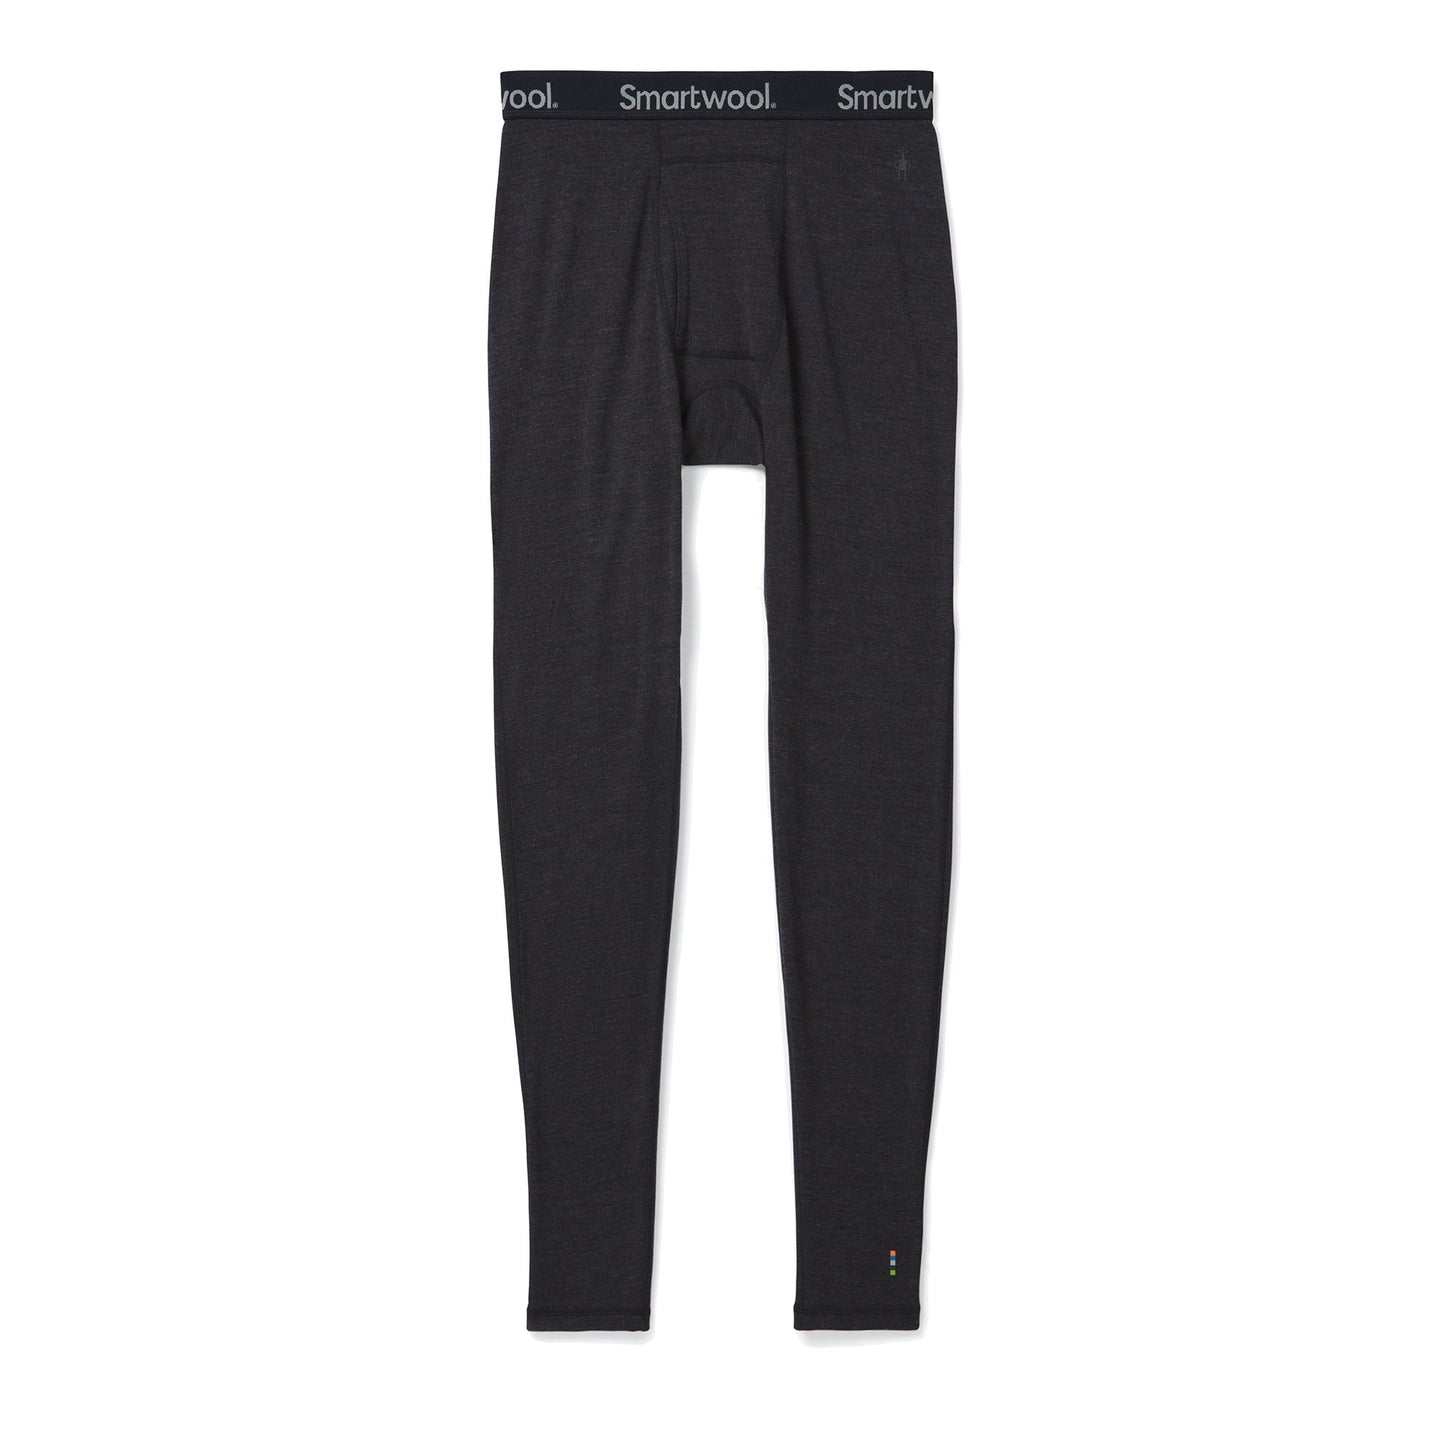 Smartwool Men's Classic Thermal Base Layer Bottoms